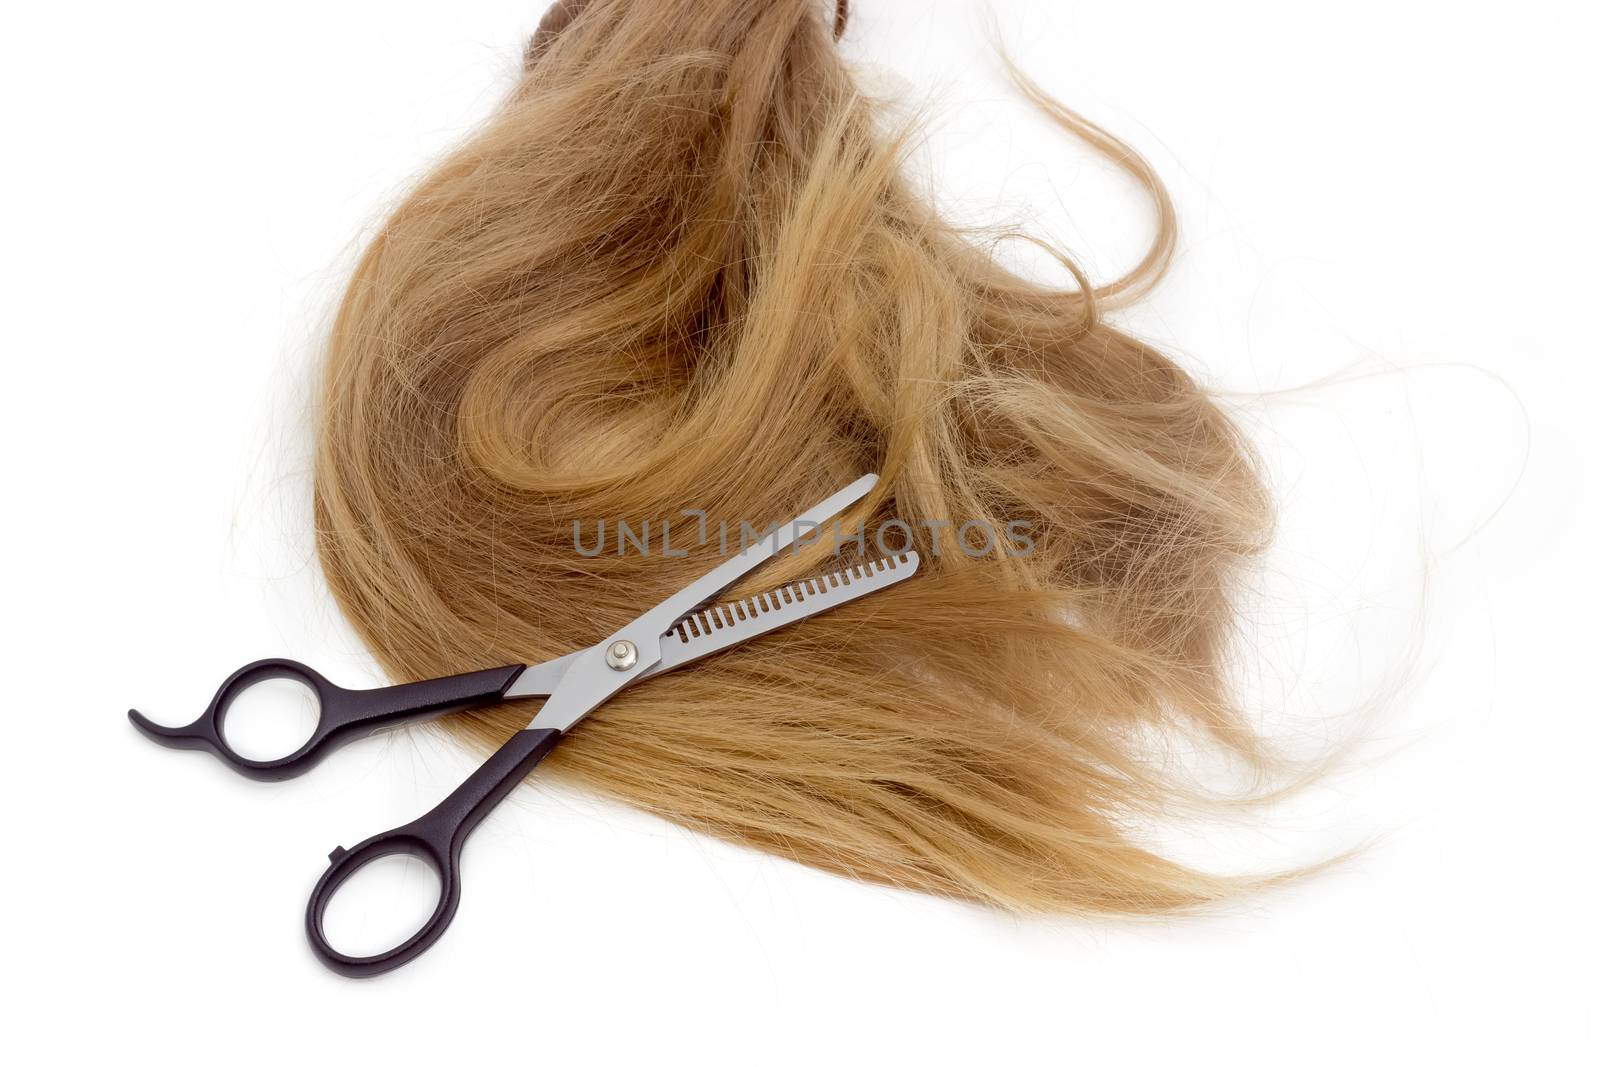 Hairdressers scissors against the backdrop of strand of female h by anmbph